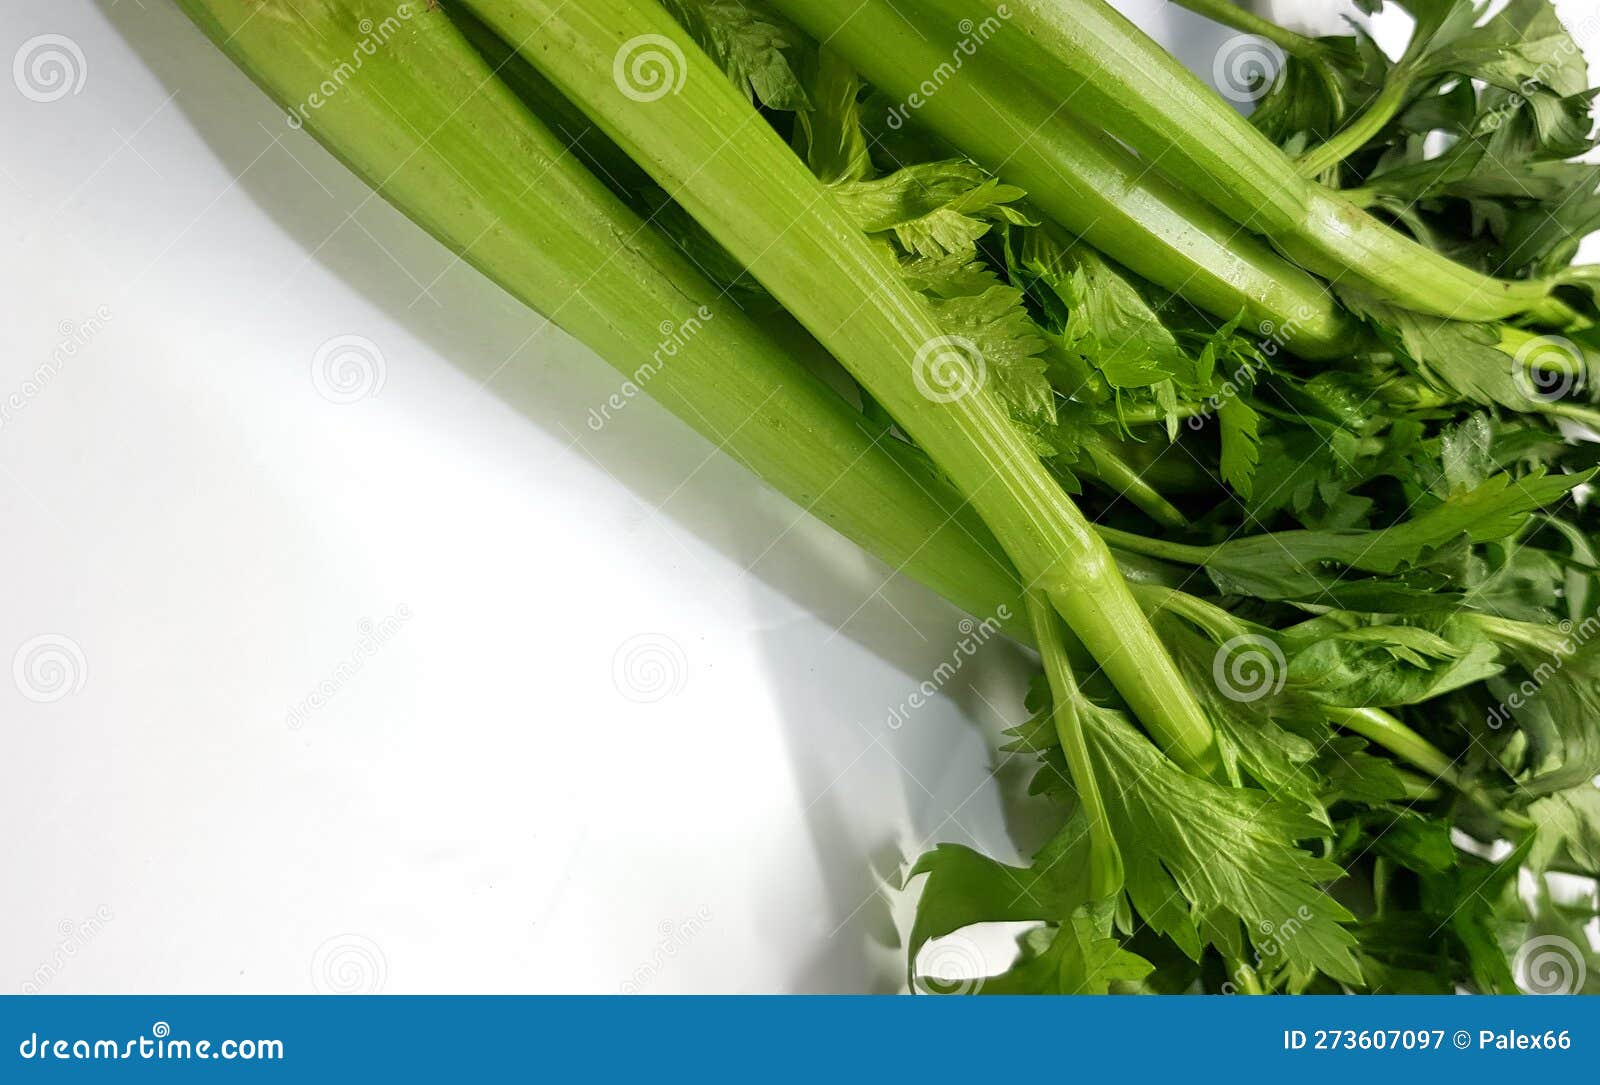 Celery. Fresh Green Stems with Leaves Stock Image - Image of cooking,  fragrant: 273607097